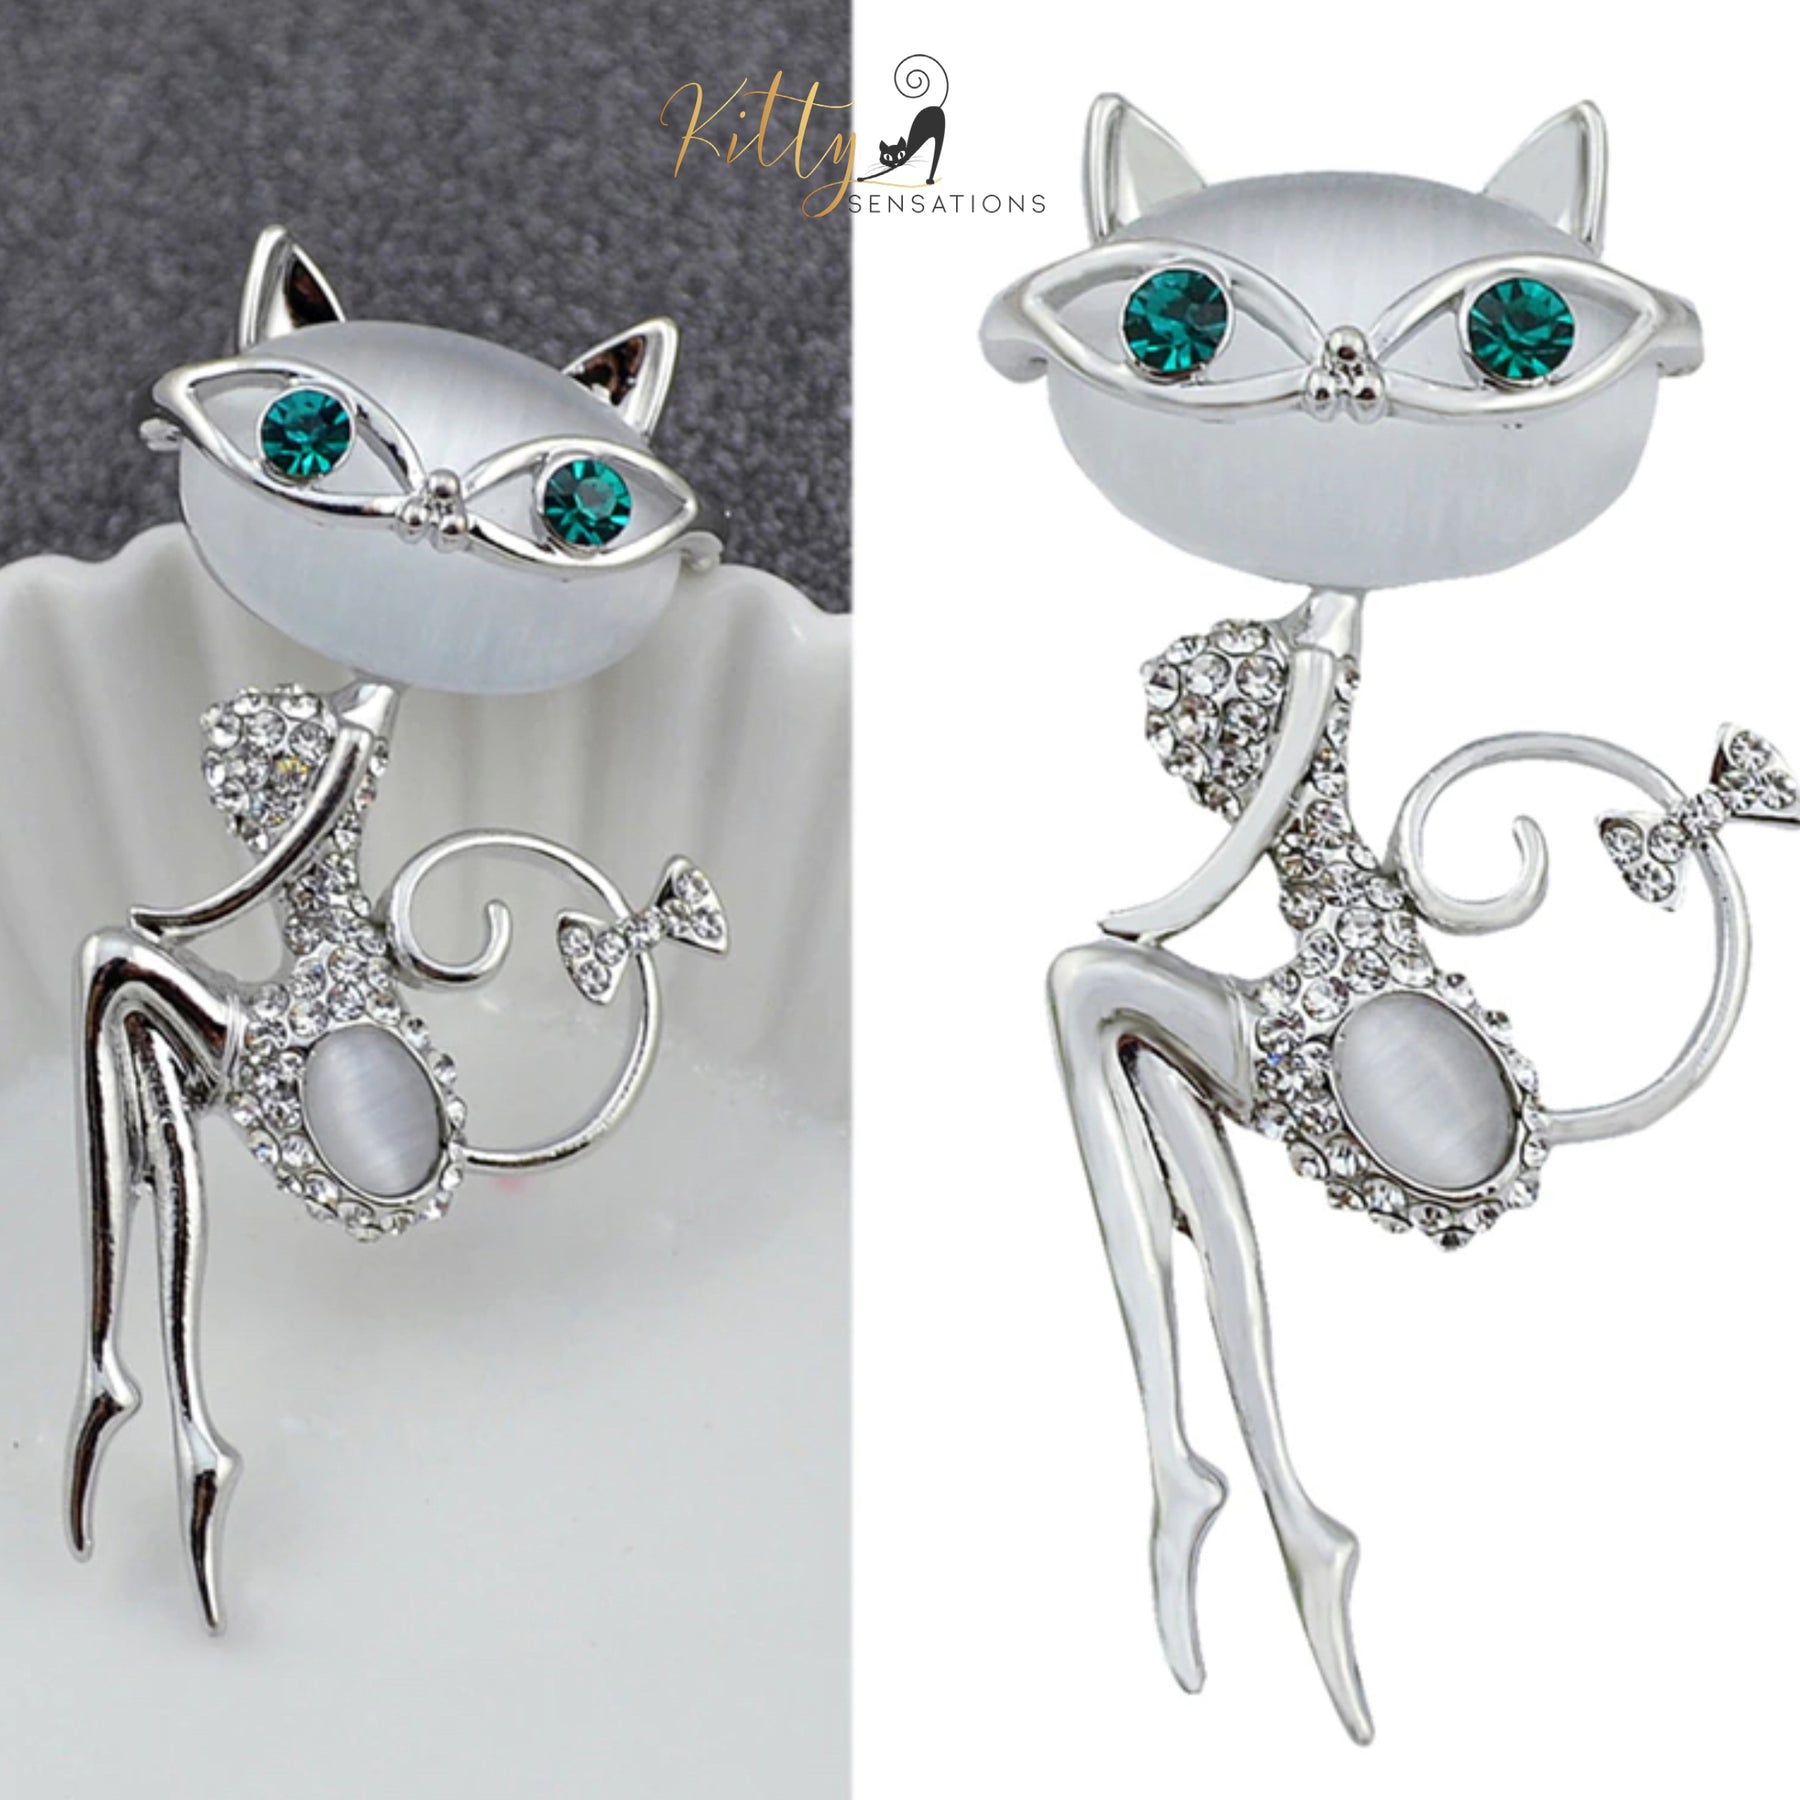 Miss Congeniality Cat Brooch/Lapel Pin in Natural Opal and CZ Crystals